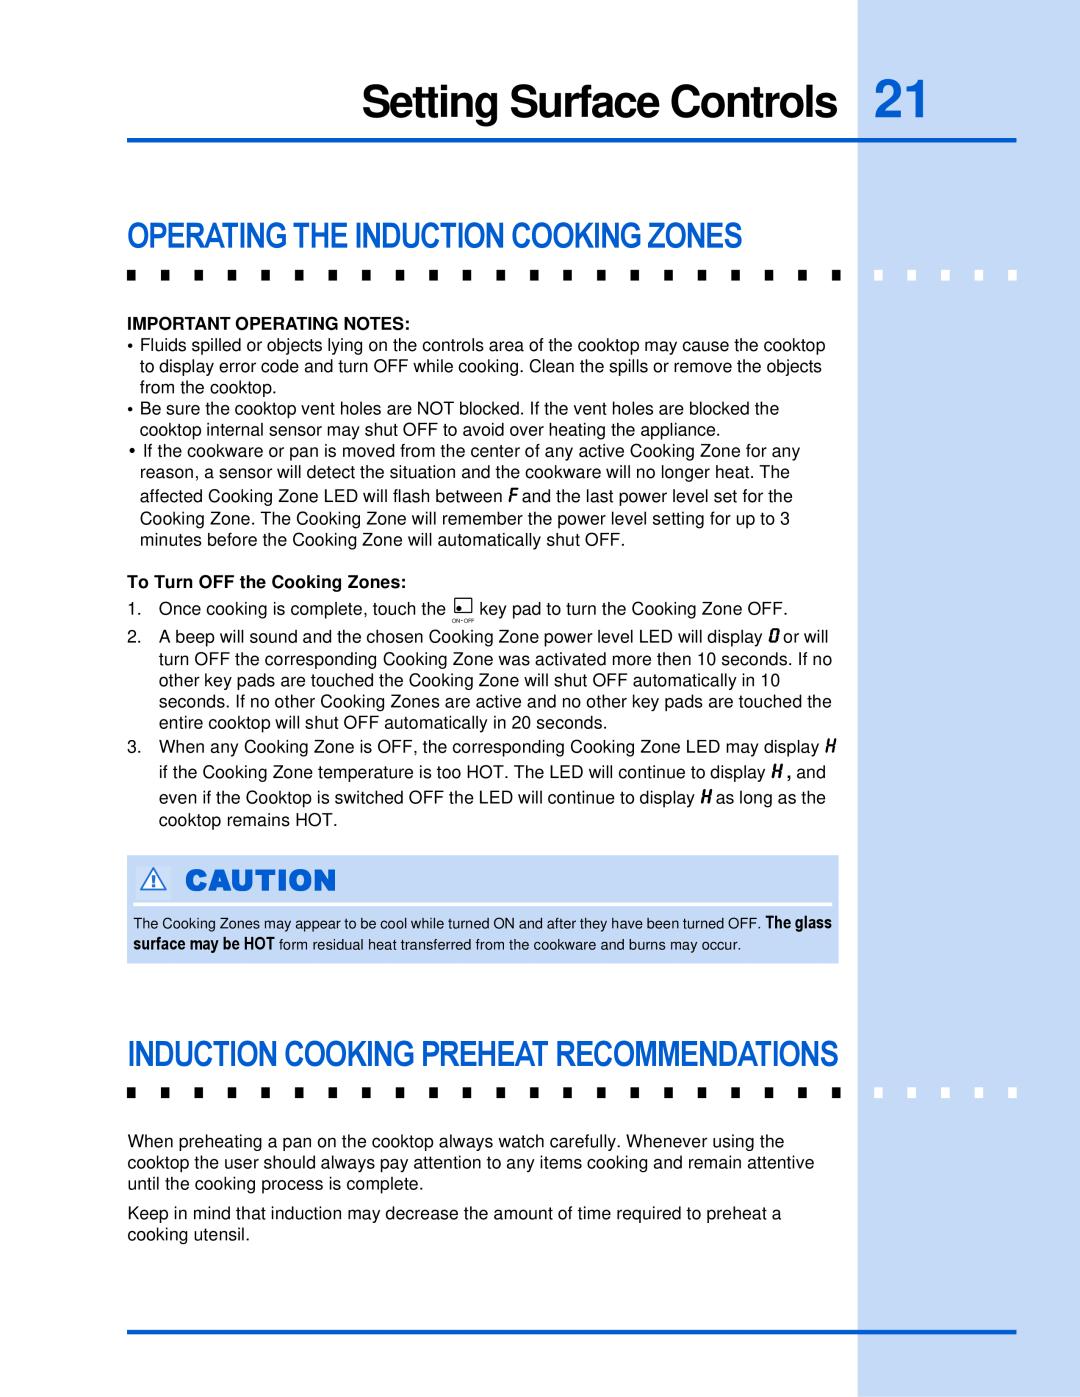 Electrolux 318 203 603 (0709) manual Induction Cooking Preheat Recommendations, Important Operating Notes 